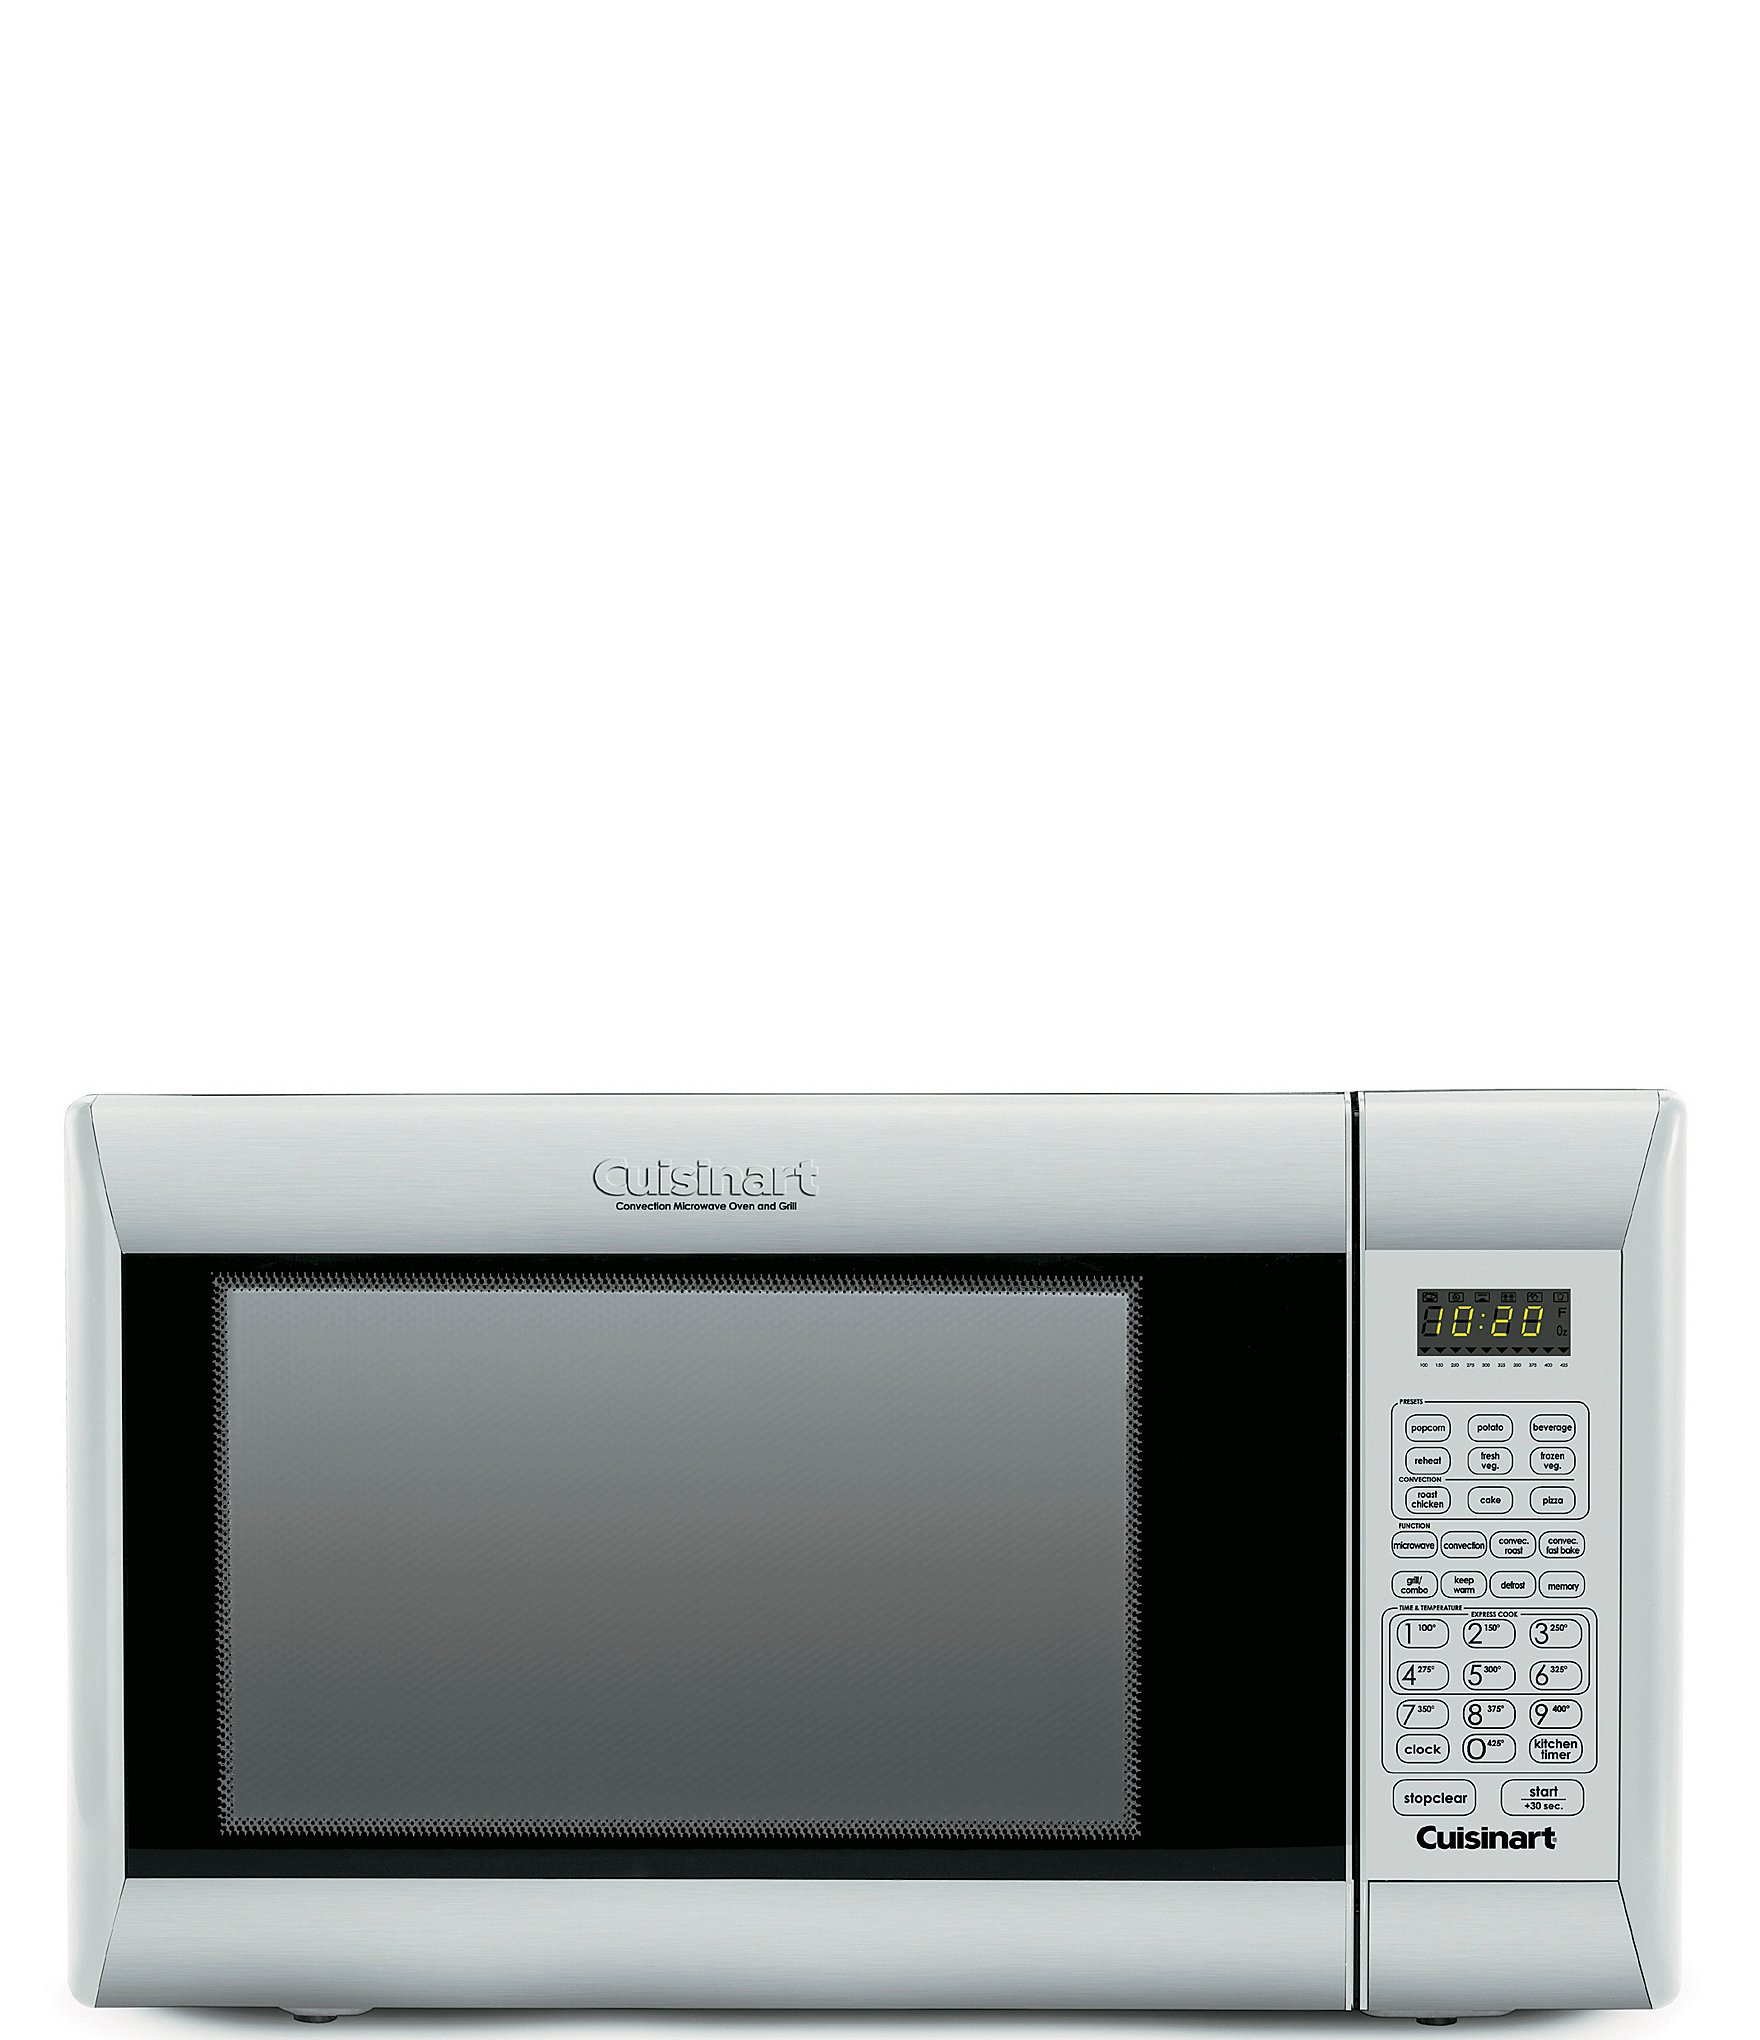 Cuisinart CMW-200 Microwave Oven Review - Consumer Reports